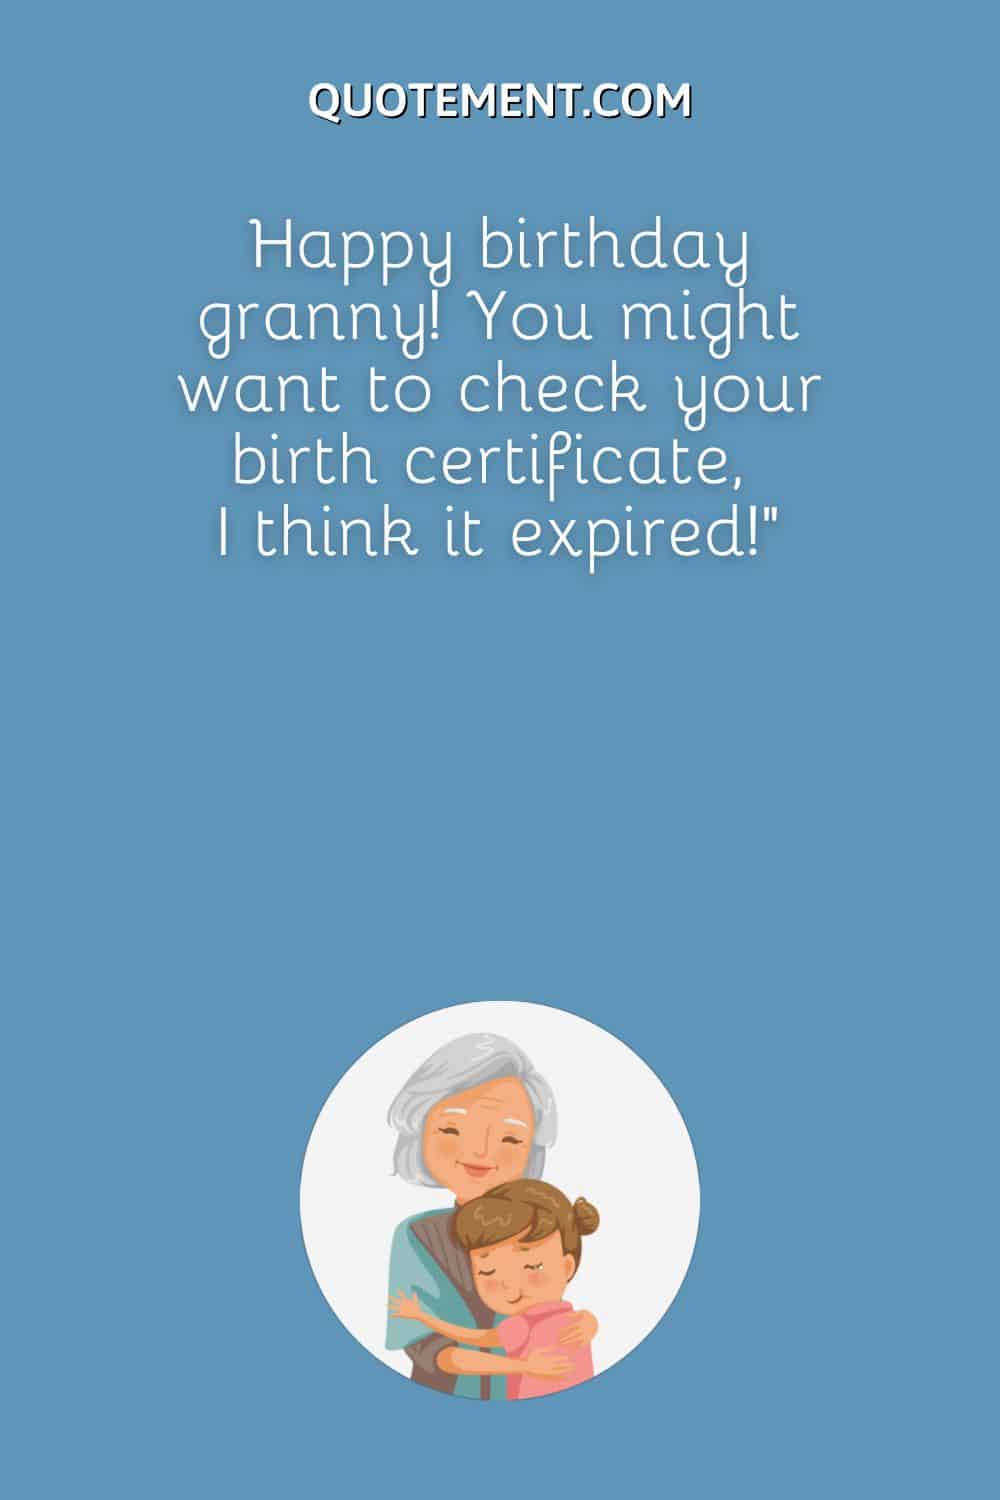 Happy birthday granny! You might want to check your birth certificate, I think it expired!